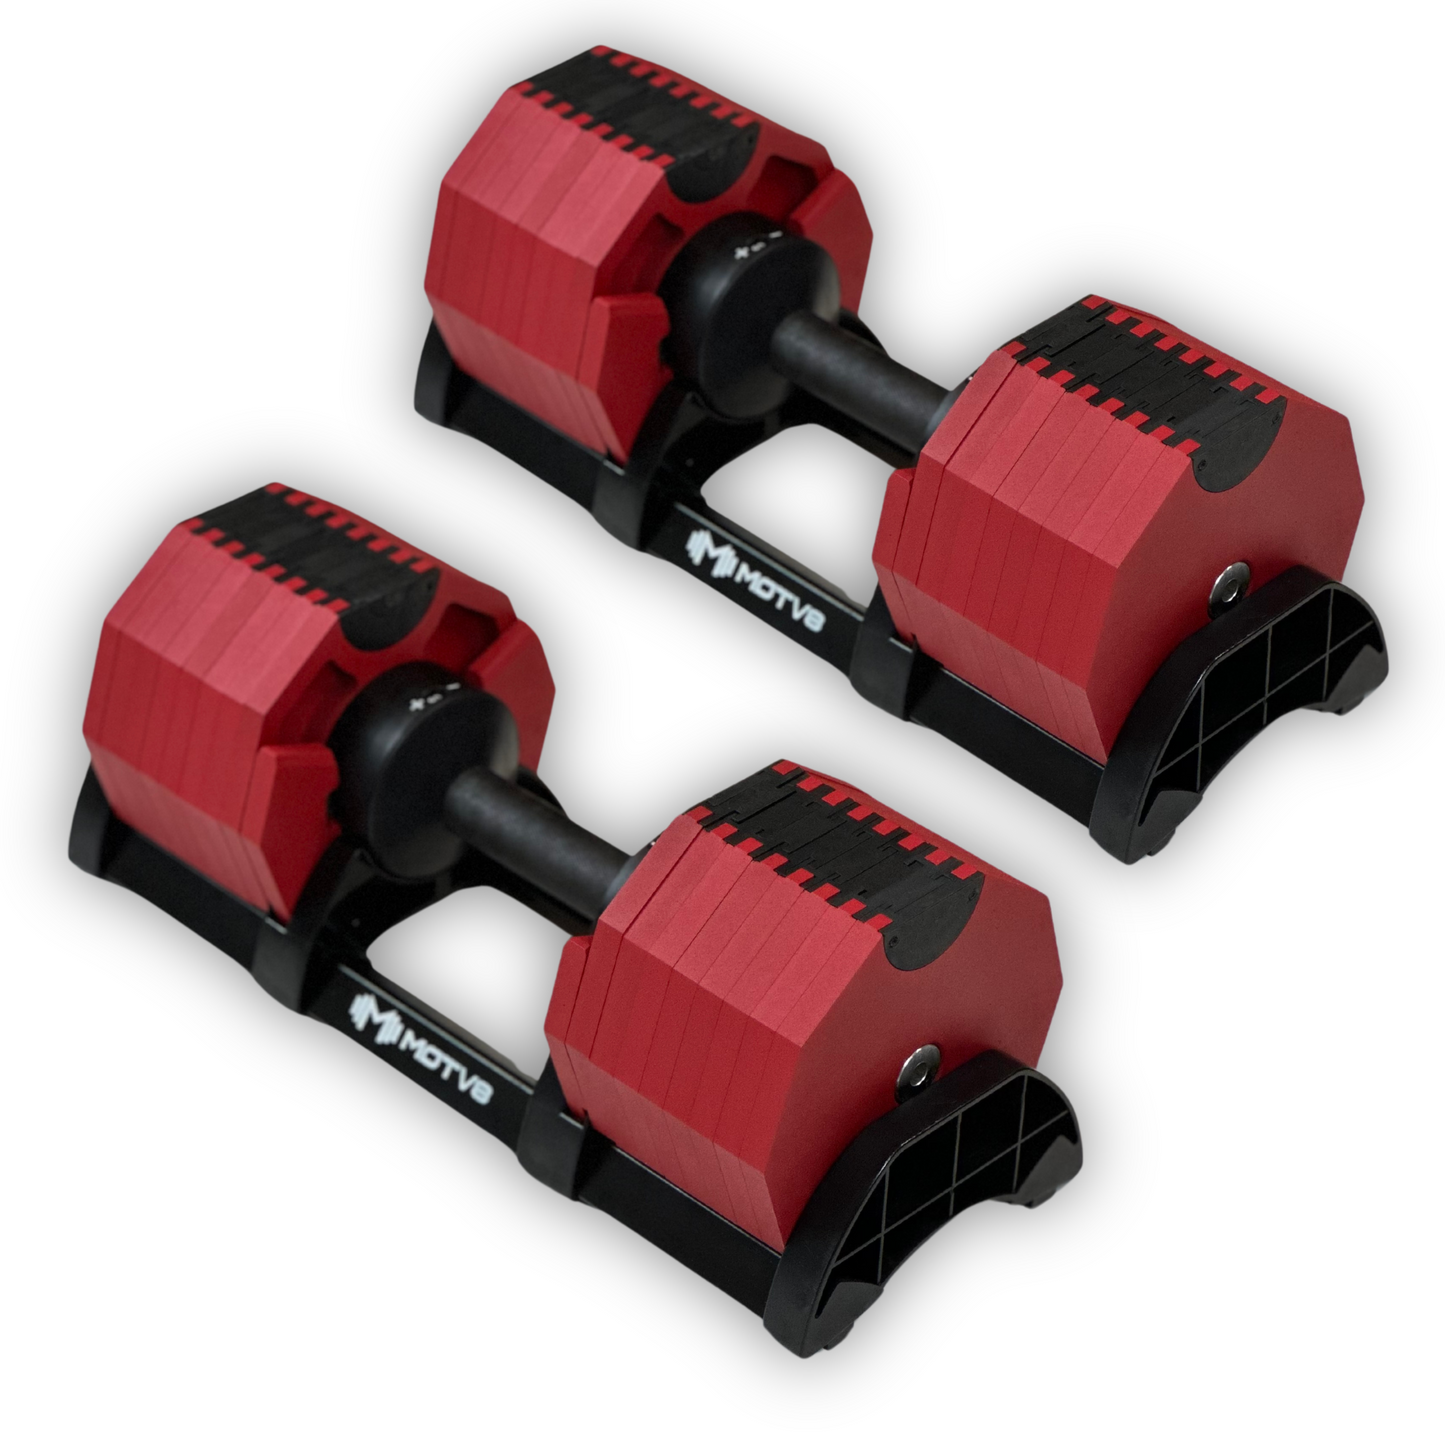 Motv8 Red / No Decabell 5-80 Adjustable Dumbbells